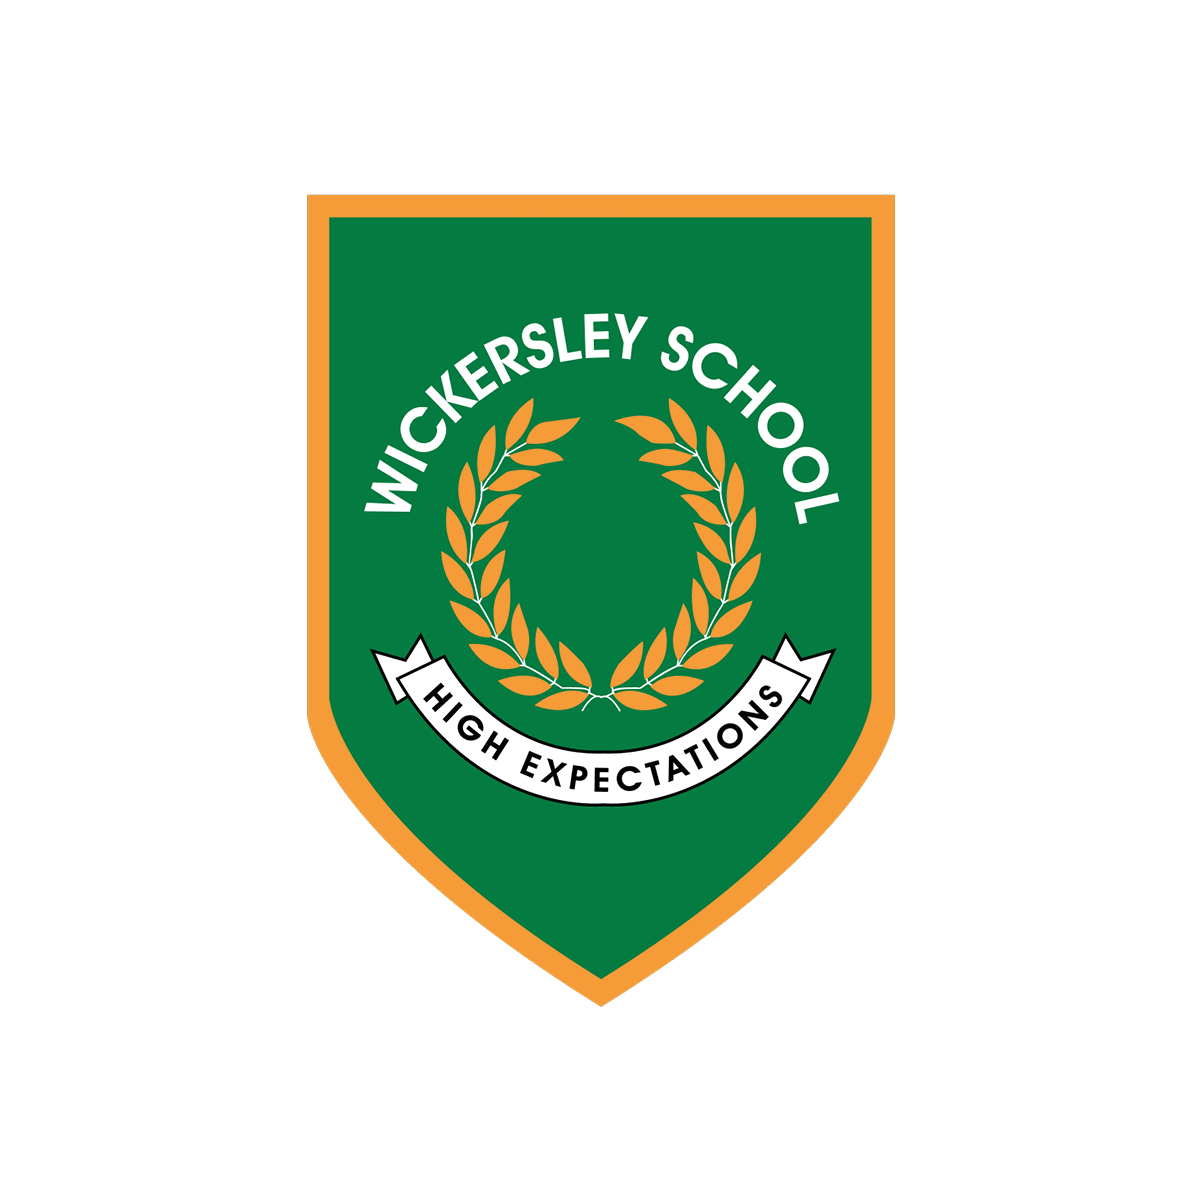 Wickersley School and Sports College